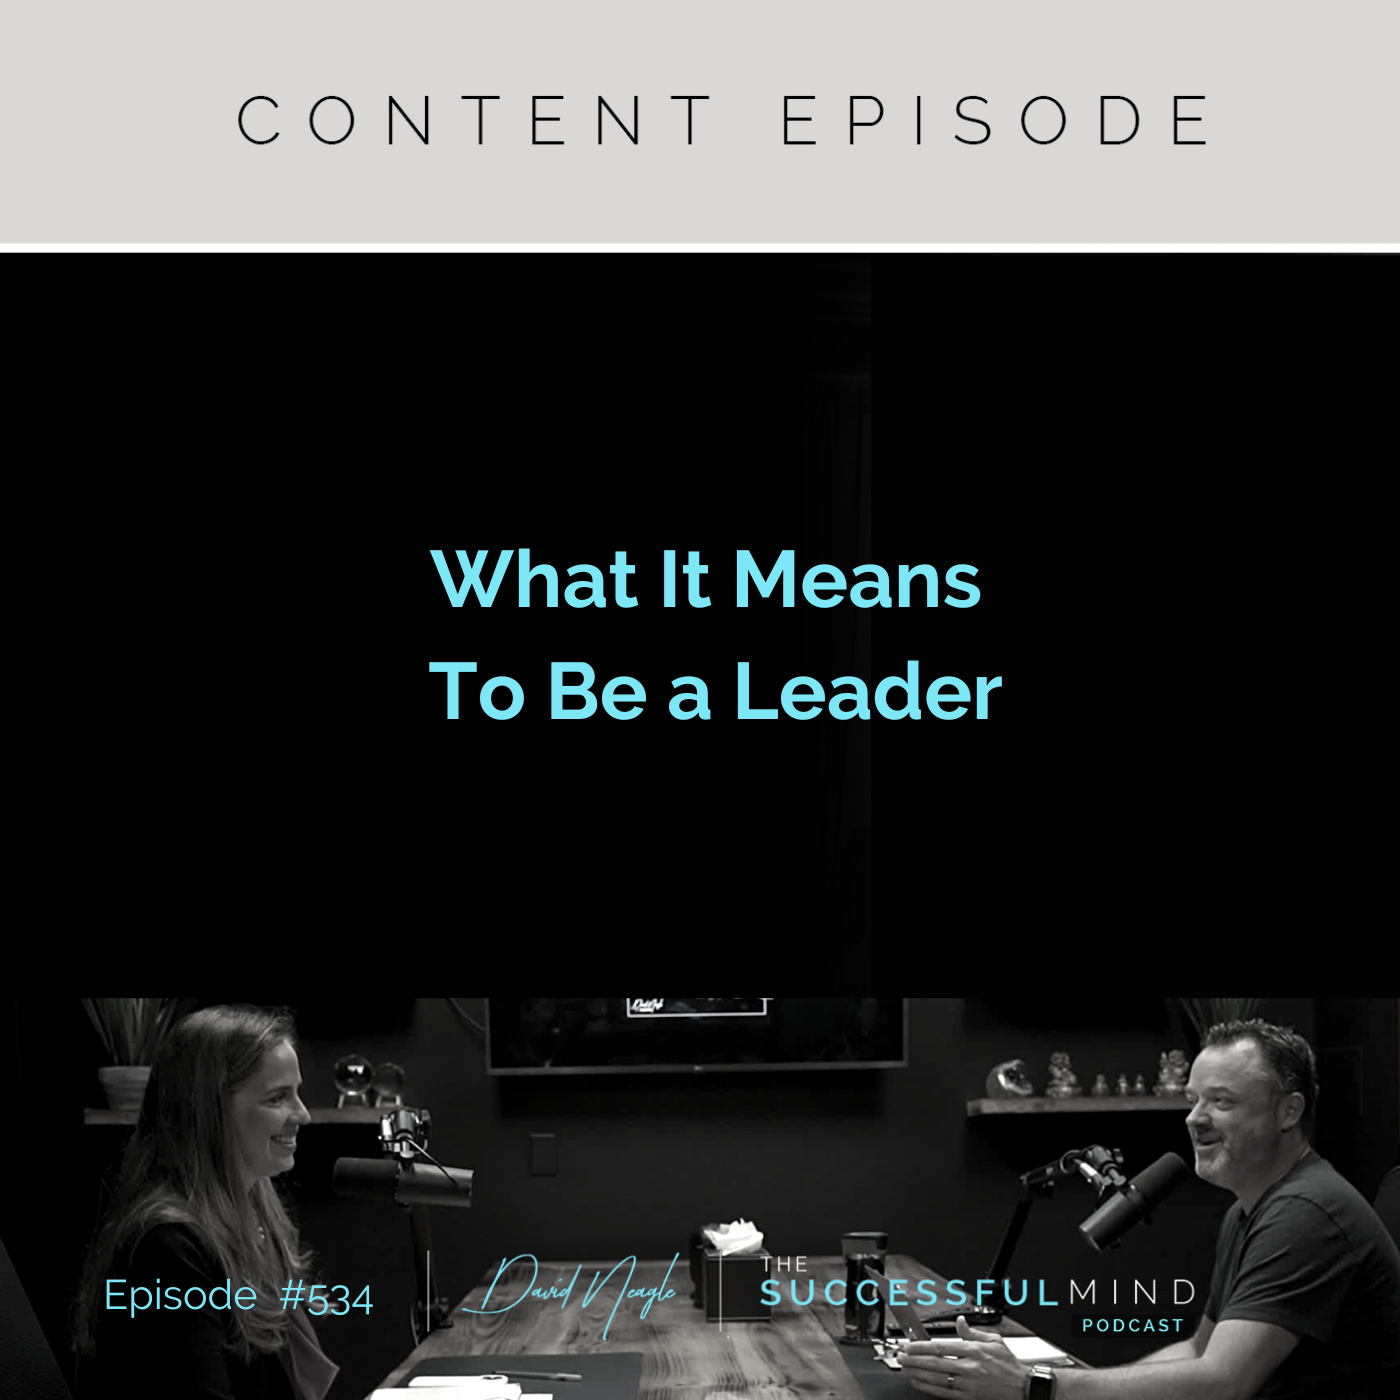 The Successful Mind Podcast - Episode 534 - What It Means To Be a Leader